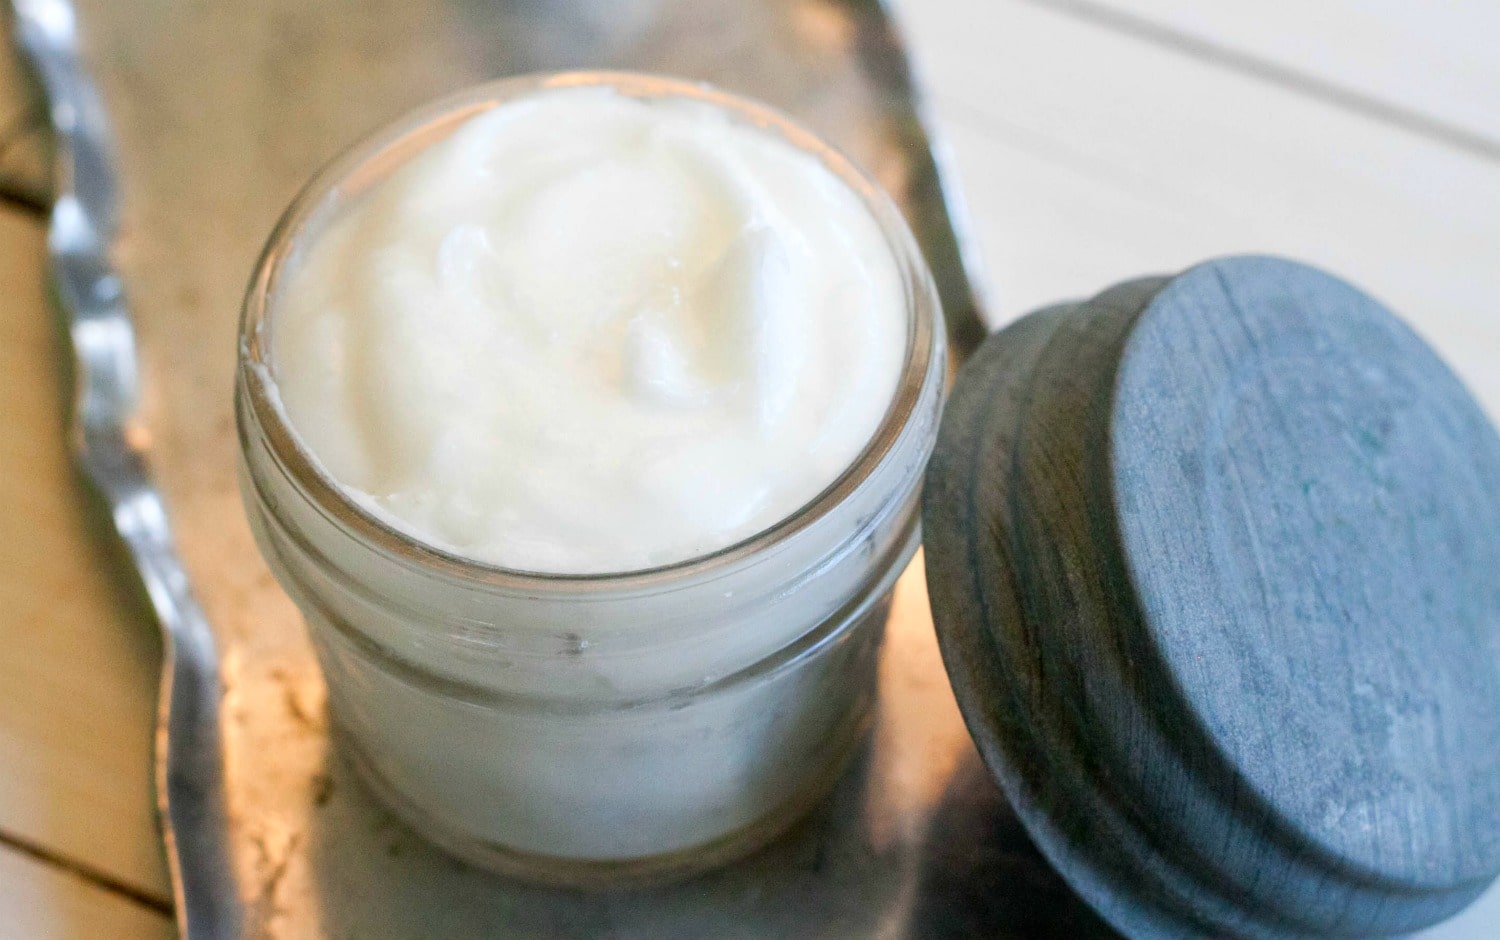 https://www.getgreenbewell.com/wp-content/uploads/2019/06/Easy-homemade-whipped-coconut-oil-body-lotion-eye-makeup-remover-small.jpg